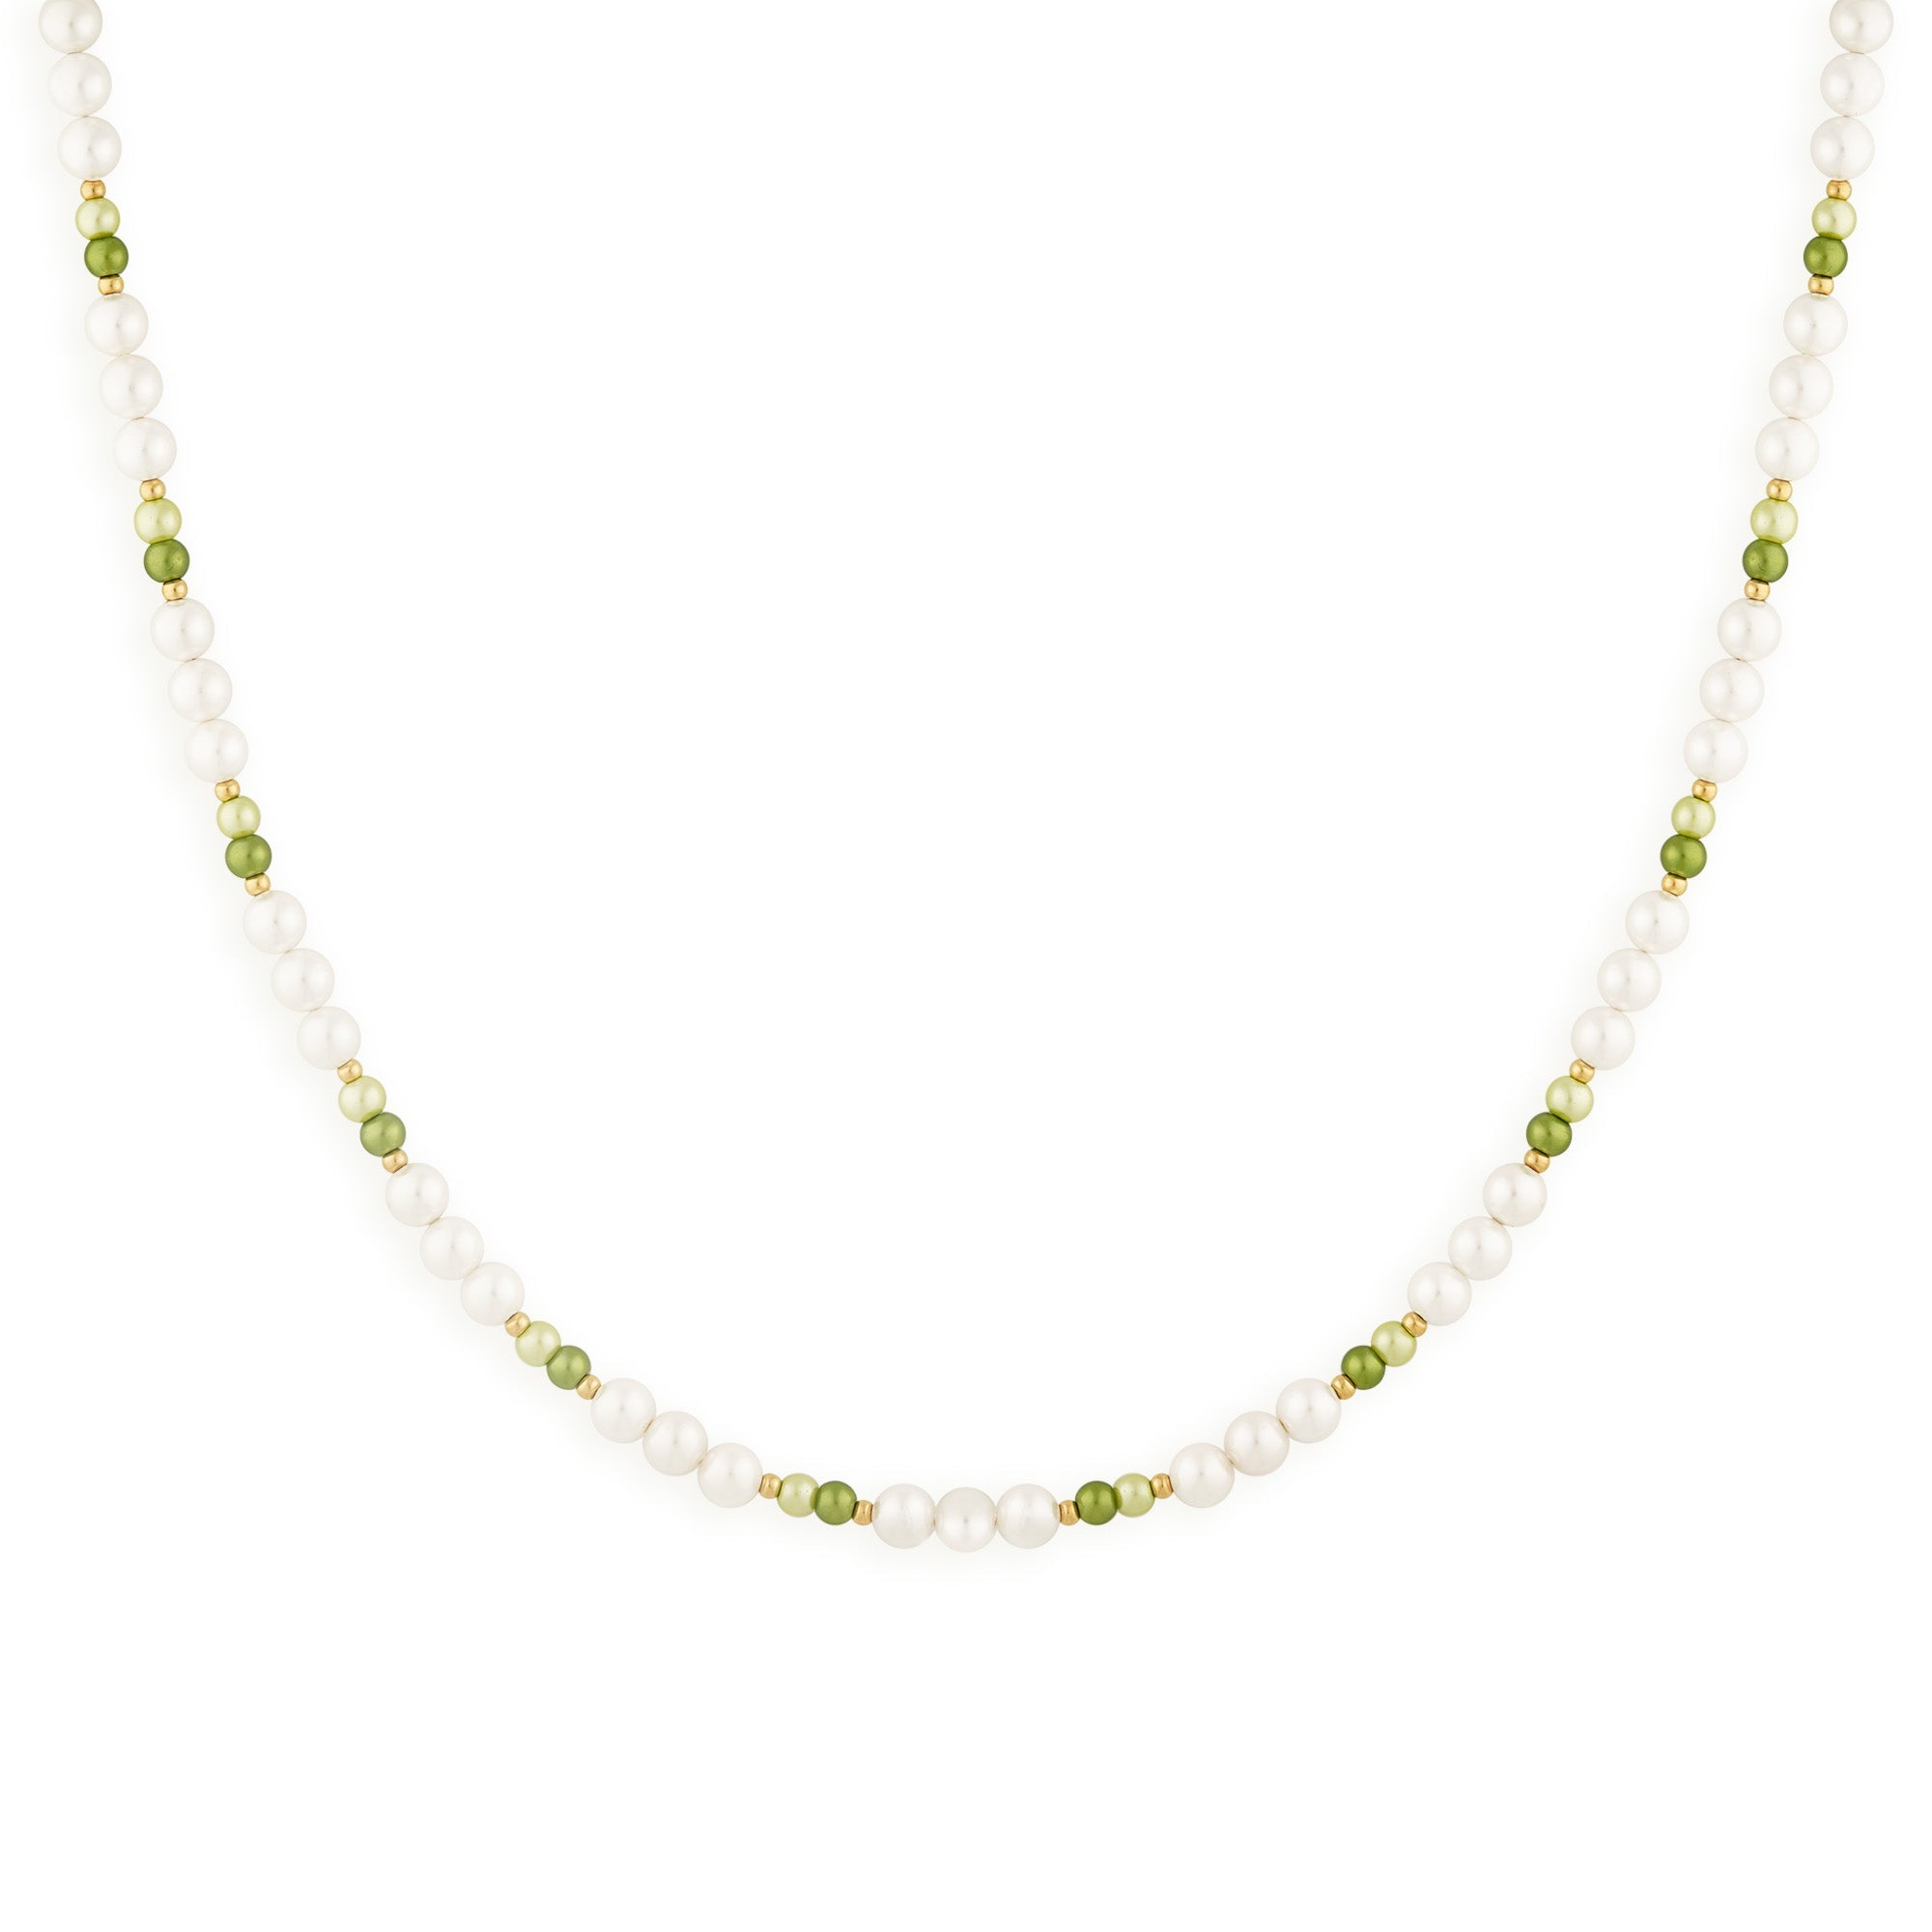 Five jewelry pearls necklace made with 2 shades of green glass beads and white pearls, crafted with natural shell. 45cm + 5cm extension, 14k gold rollo chain for adjustment. Fashion accessory, statement jewelry. Designed in Montreal, Canada.